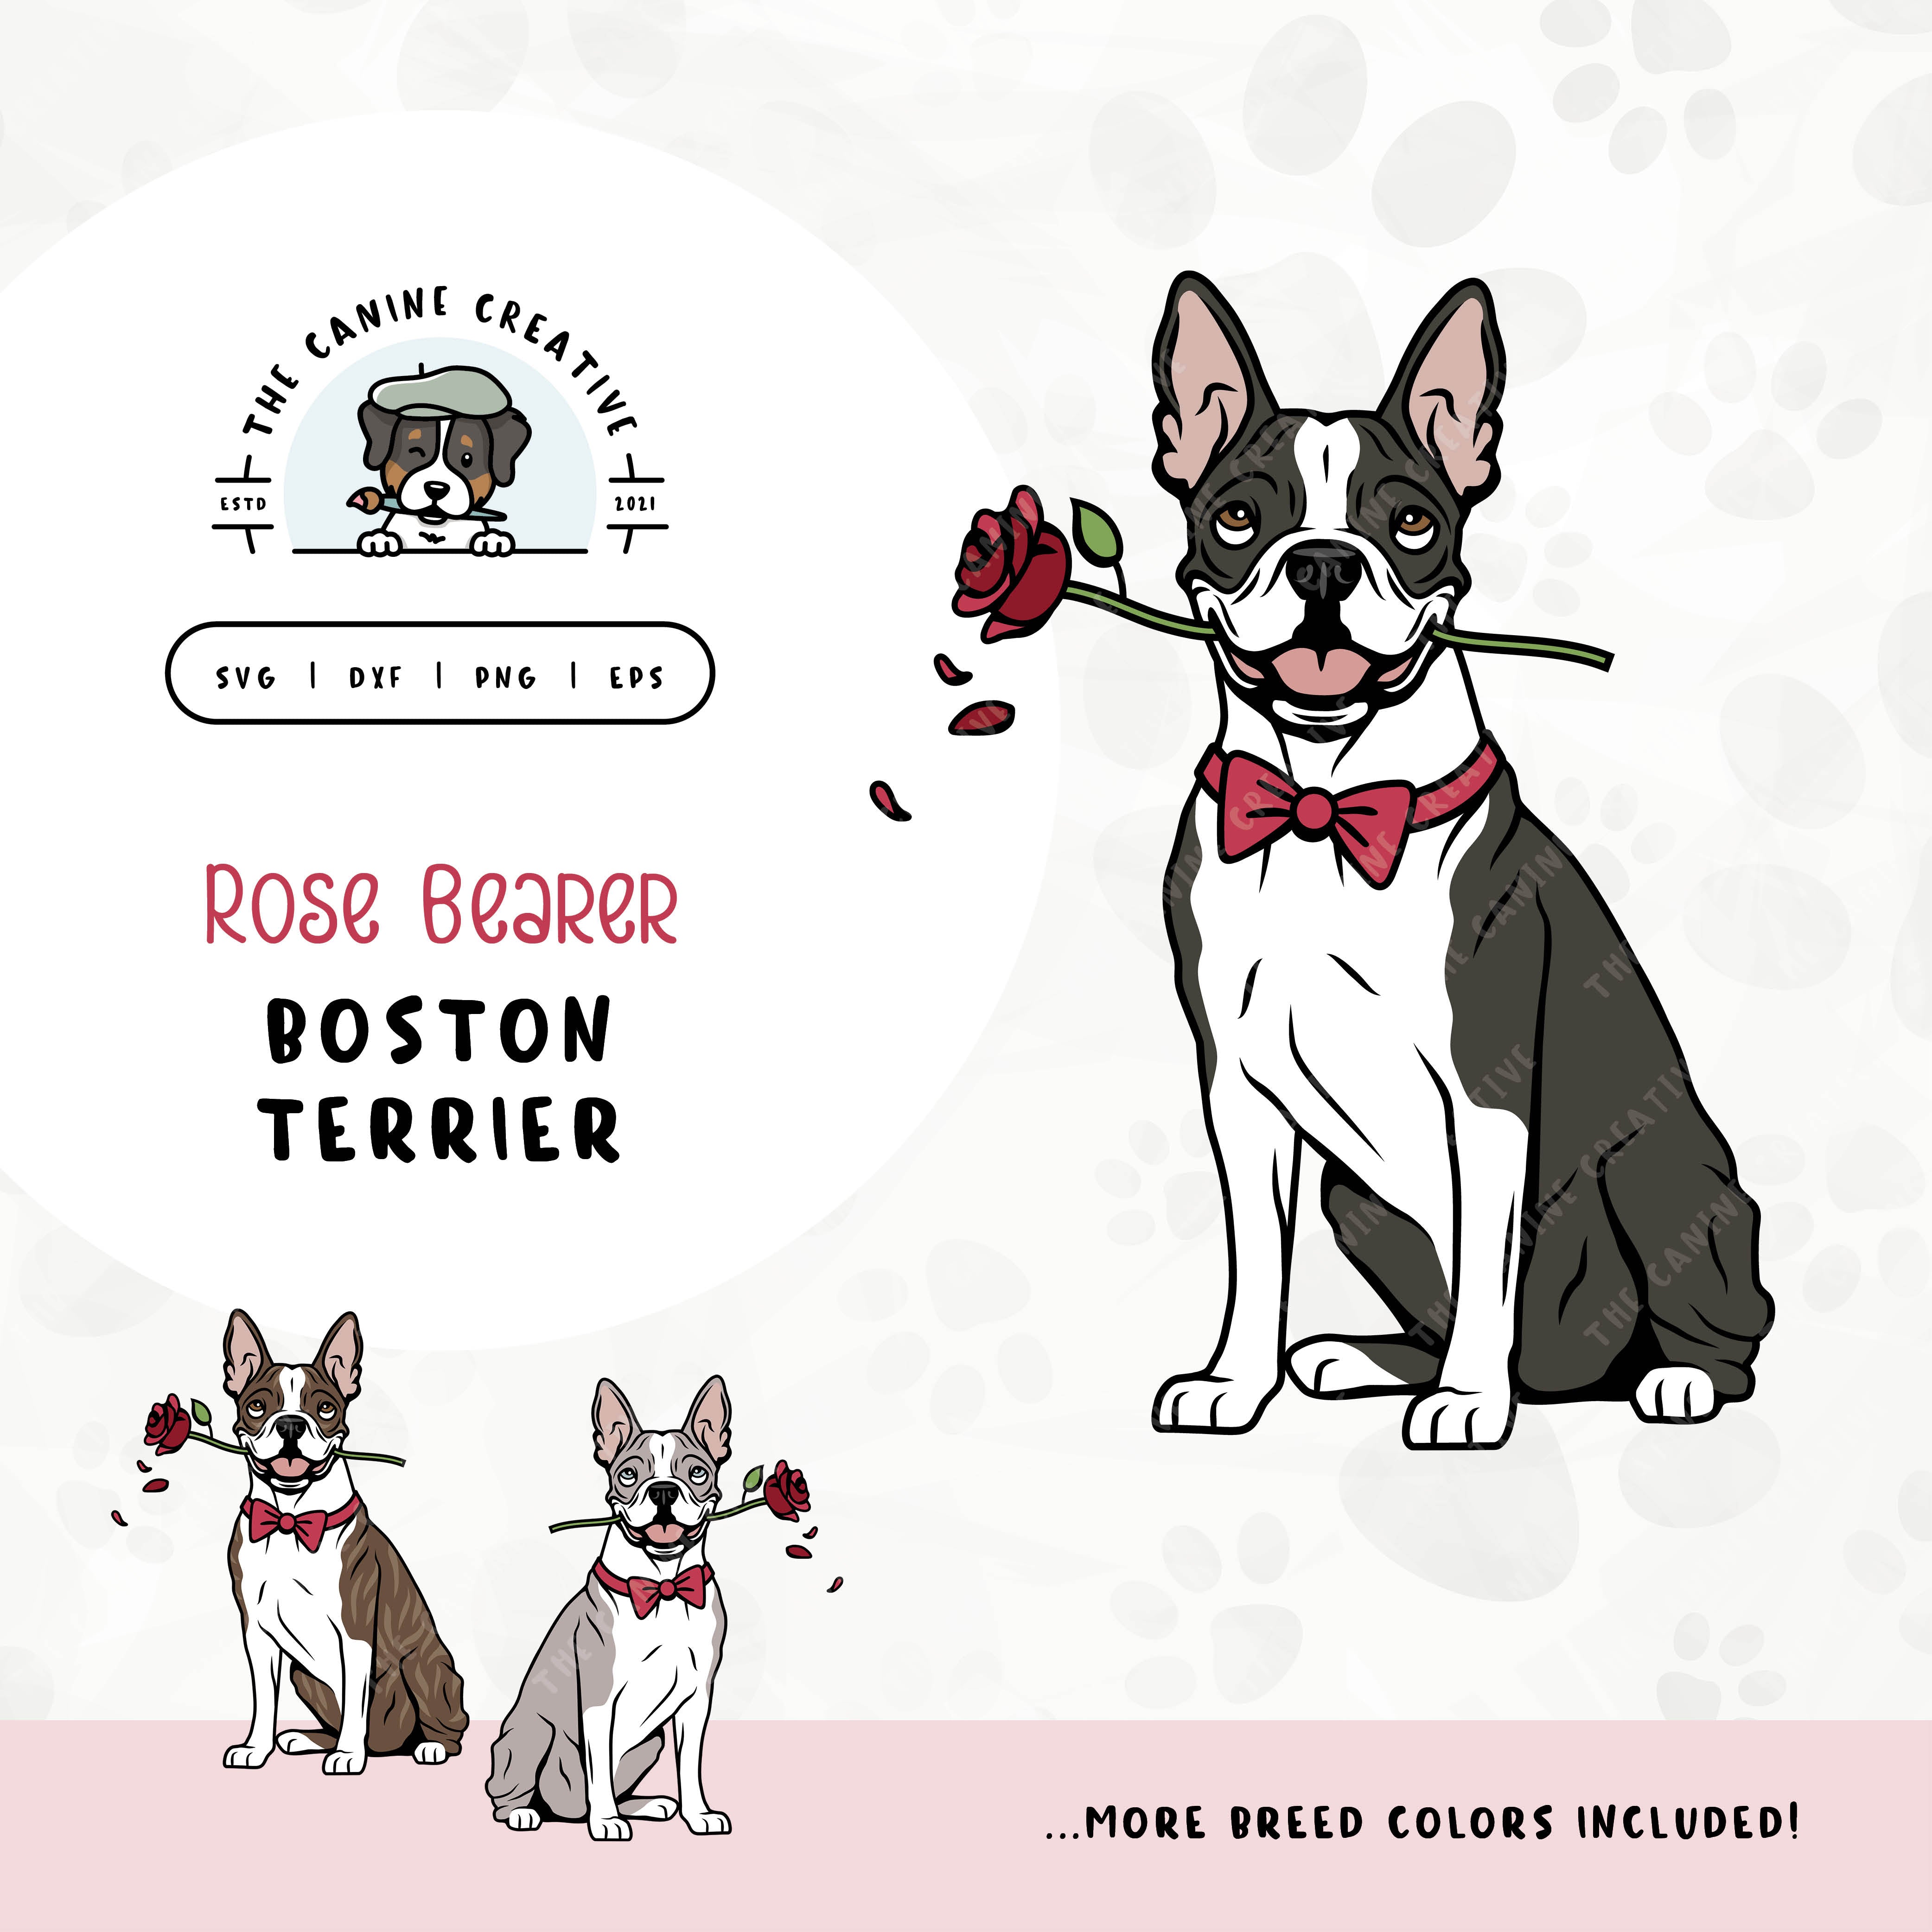 This charming illustration of a Boston Terrier features a dapper dog adorned with a bow-tie and holding a rose. File formats include: SVG, DXF, PNG, and EPS.